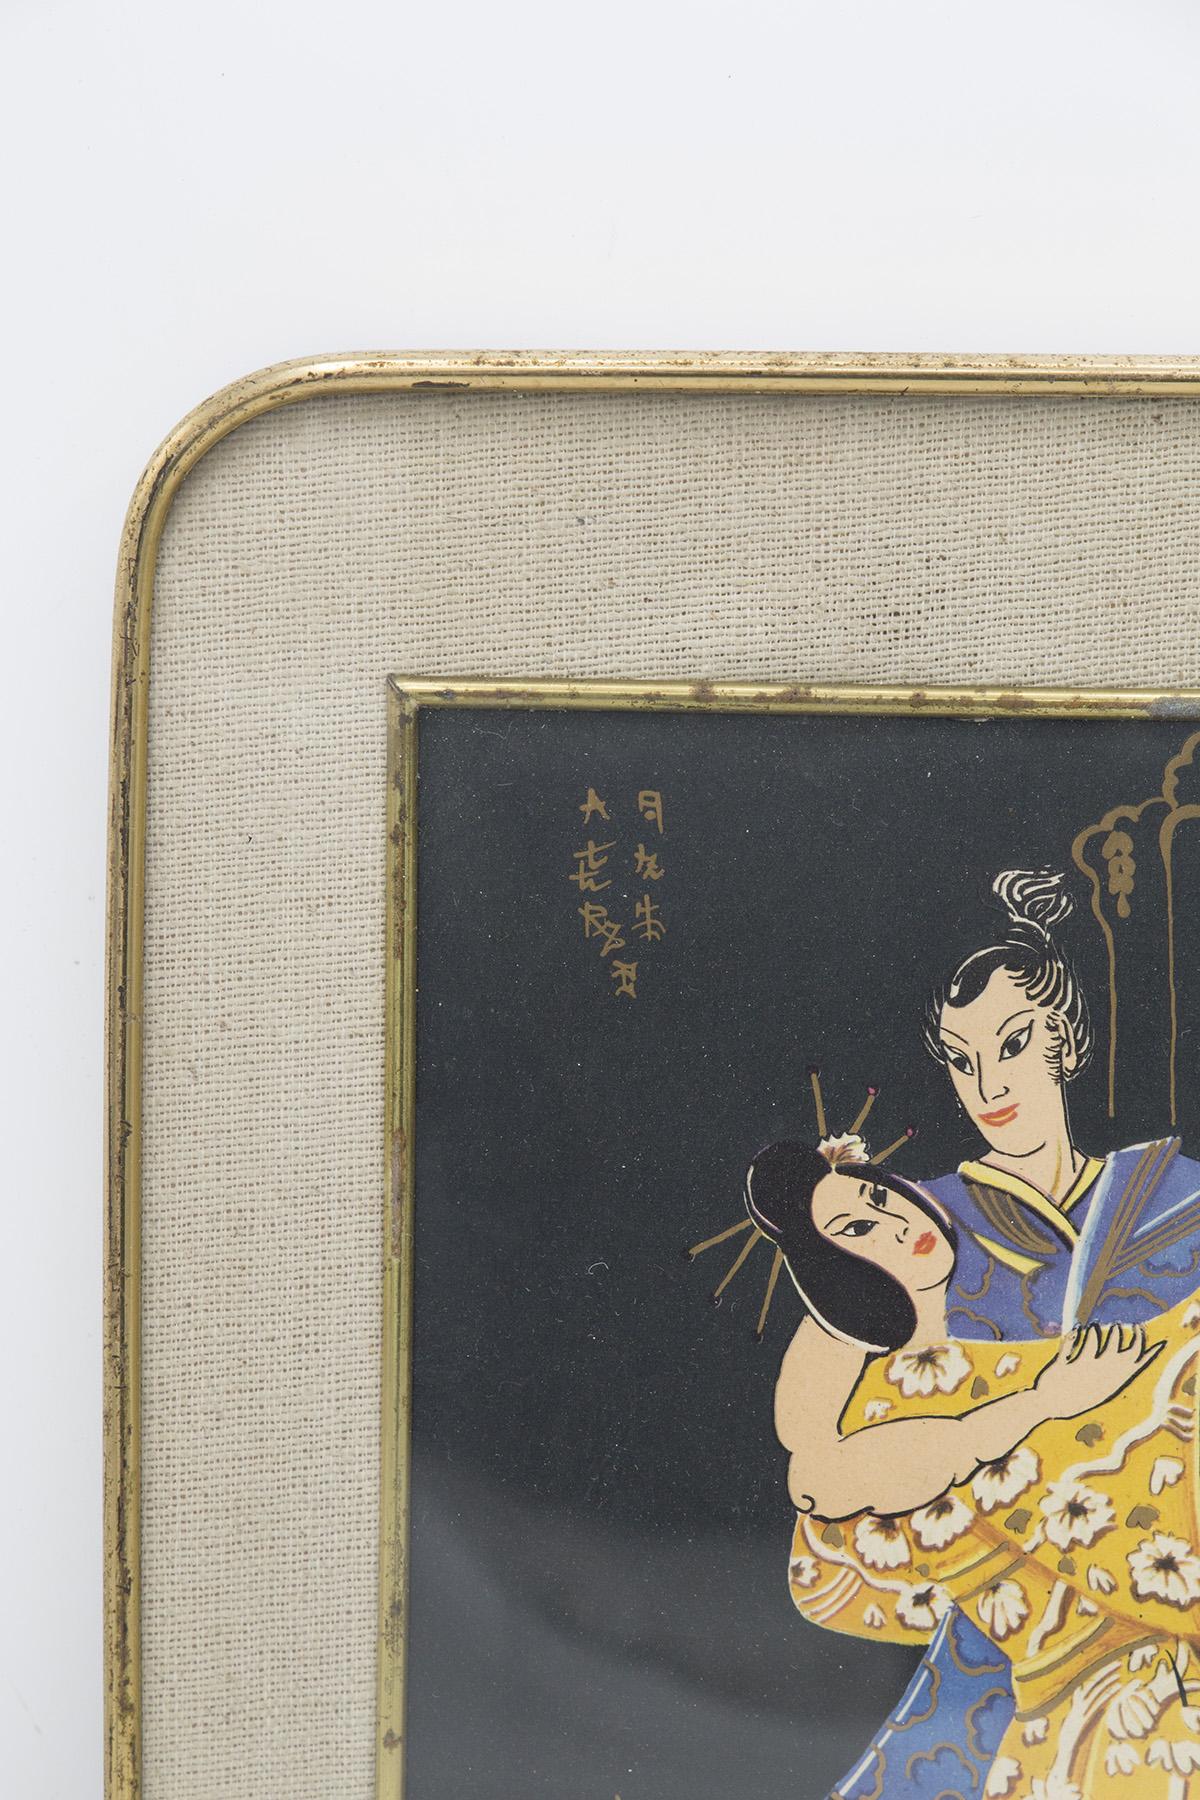 Antique and very rare Japanese painting made in the early 1900s by a fine Japanese manufacturer.
The painting has a rectangular brass frame with rounded corners. Internally we see an additional frame made of yuta, classic sand colour, very